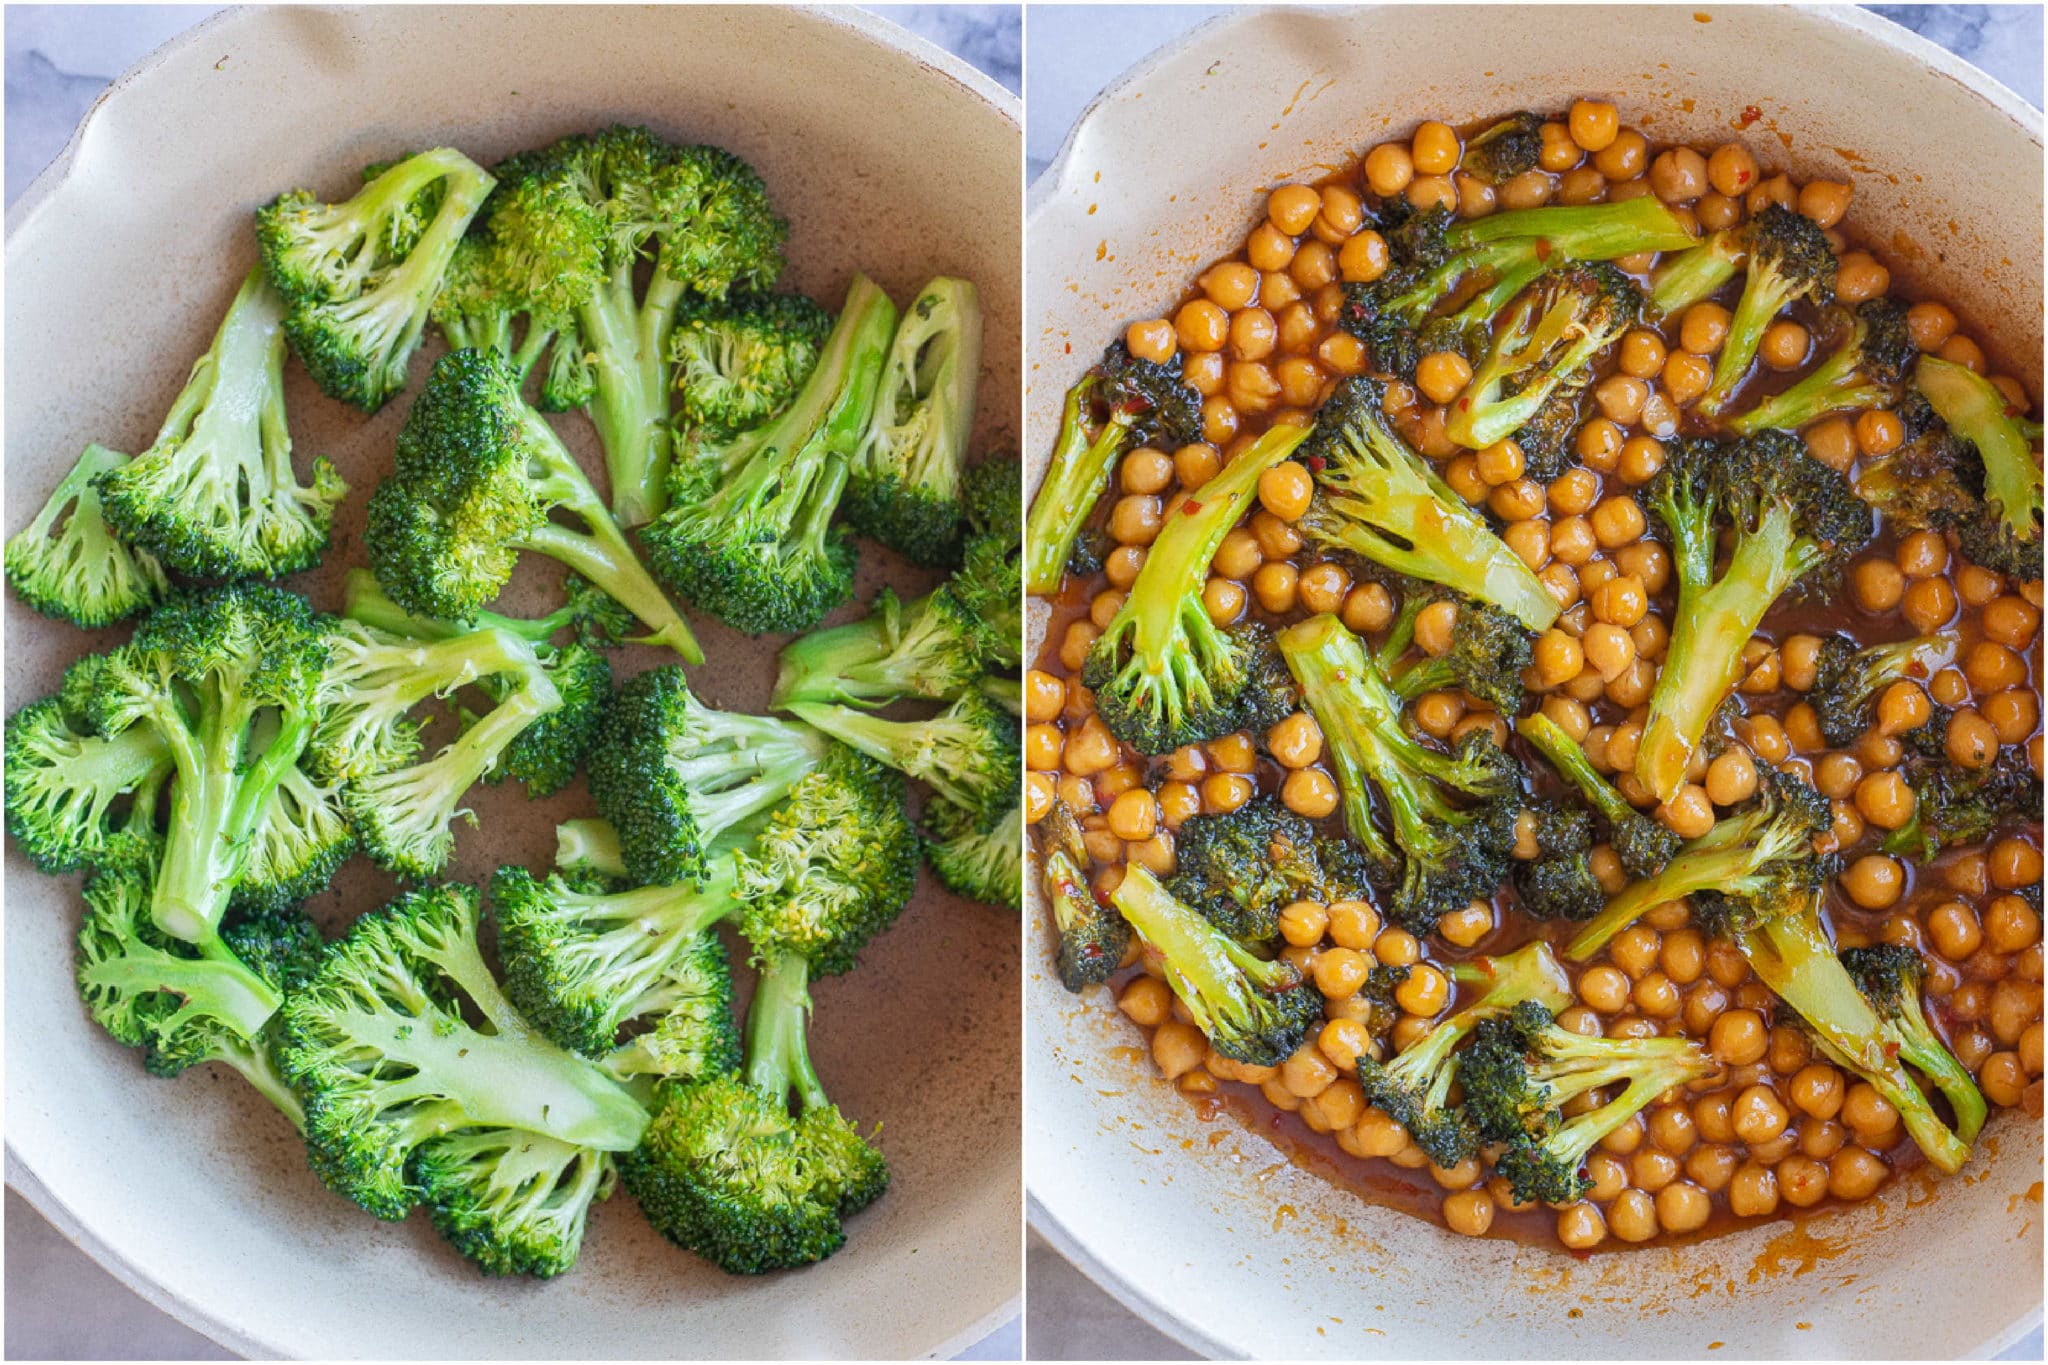 cooked broccoli in the pan with the sauce and chickpeas